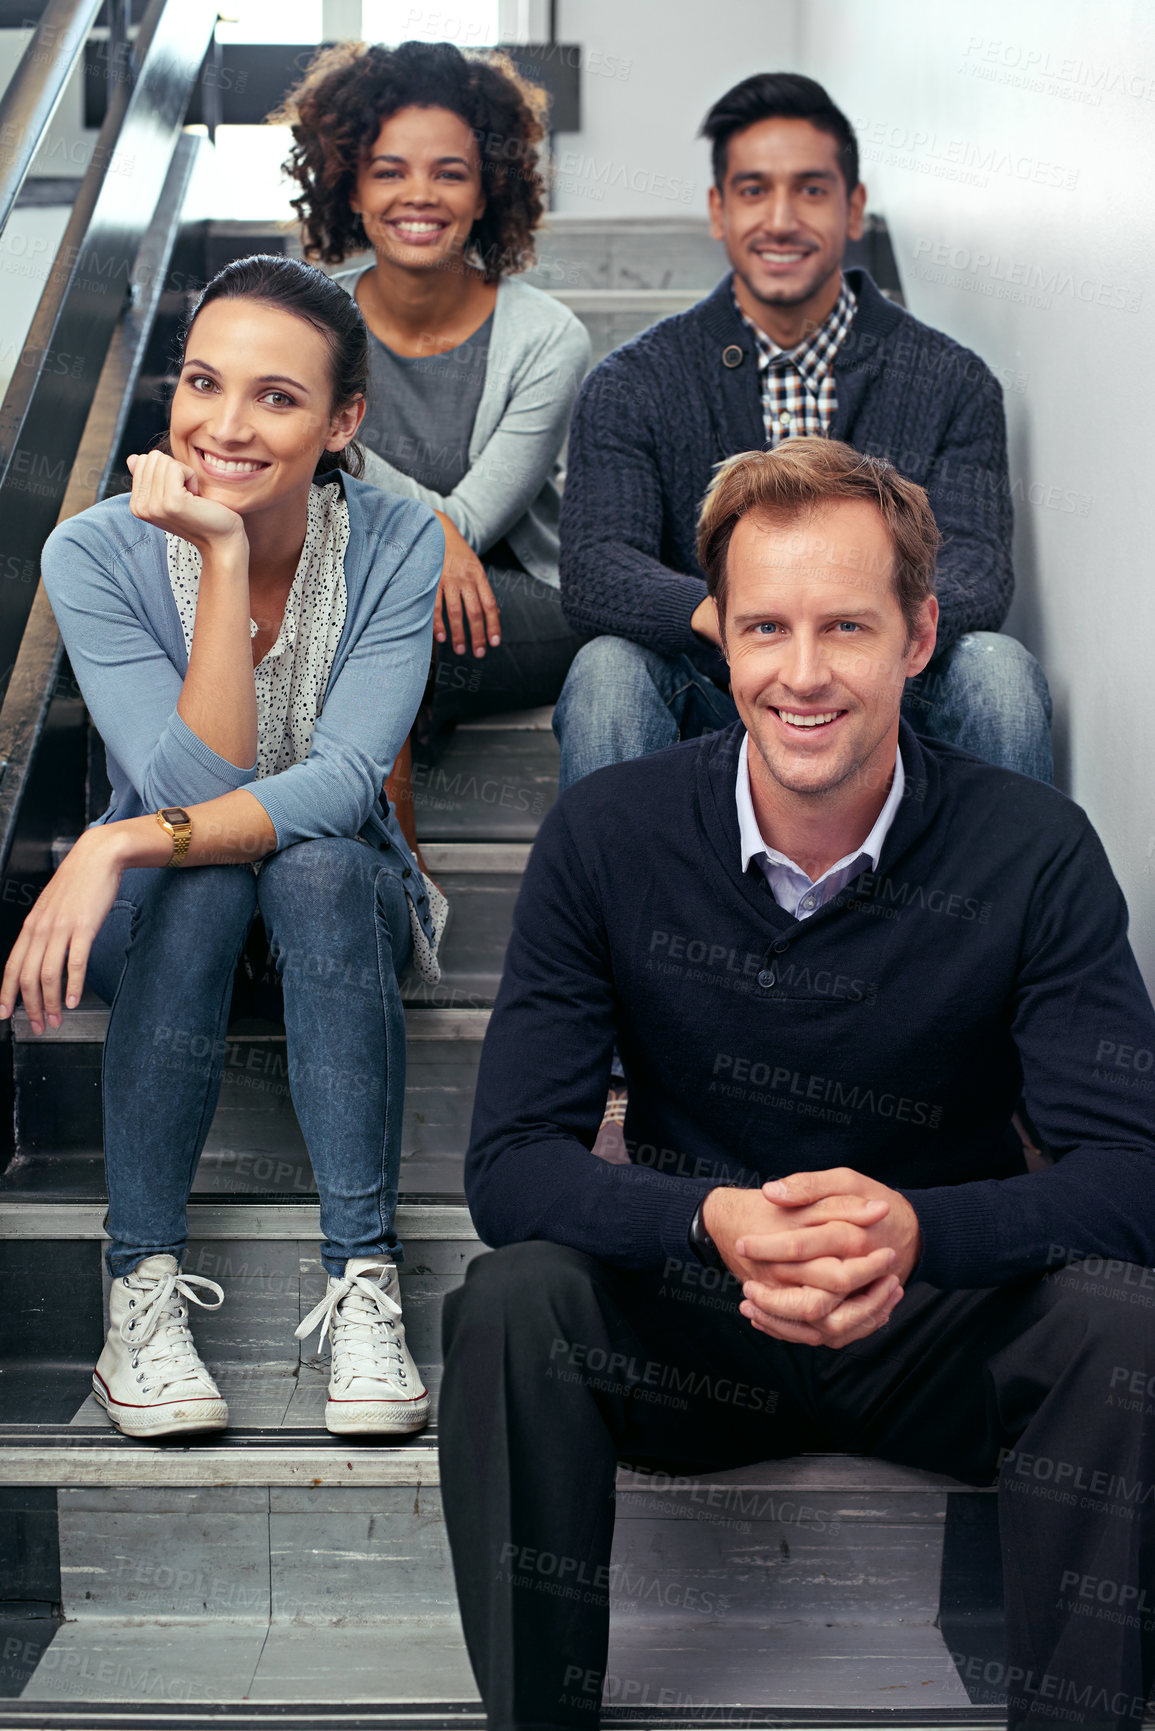 Buy stock photo Portrait of a group of office coworkers sitting in a stairwell